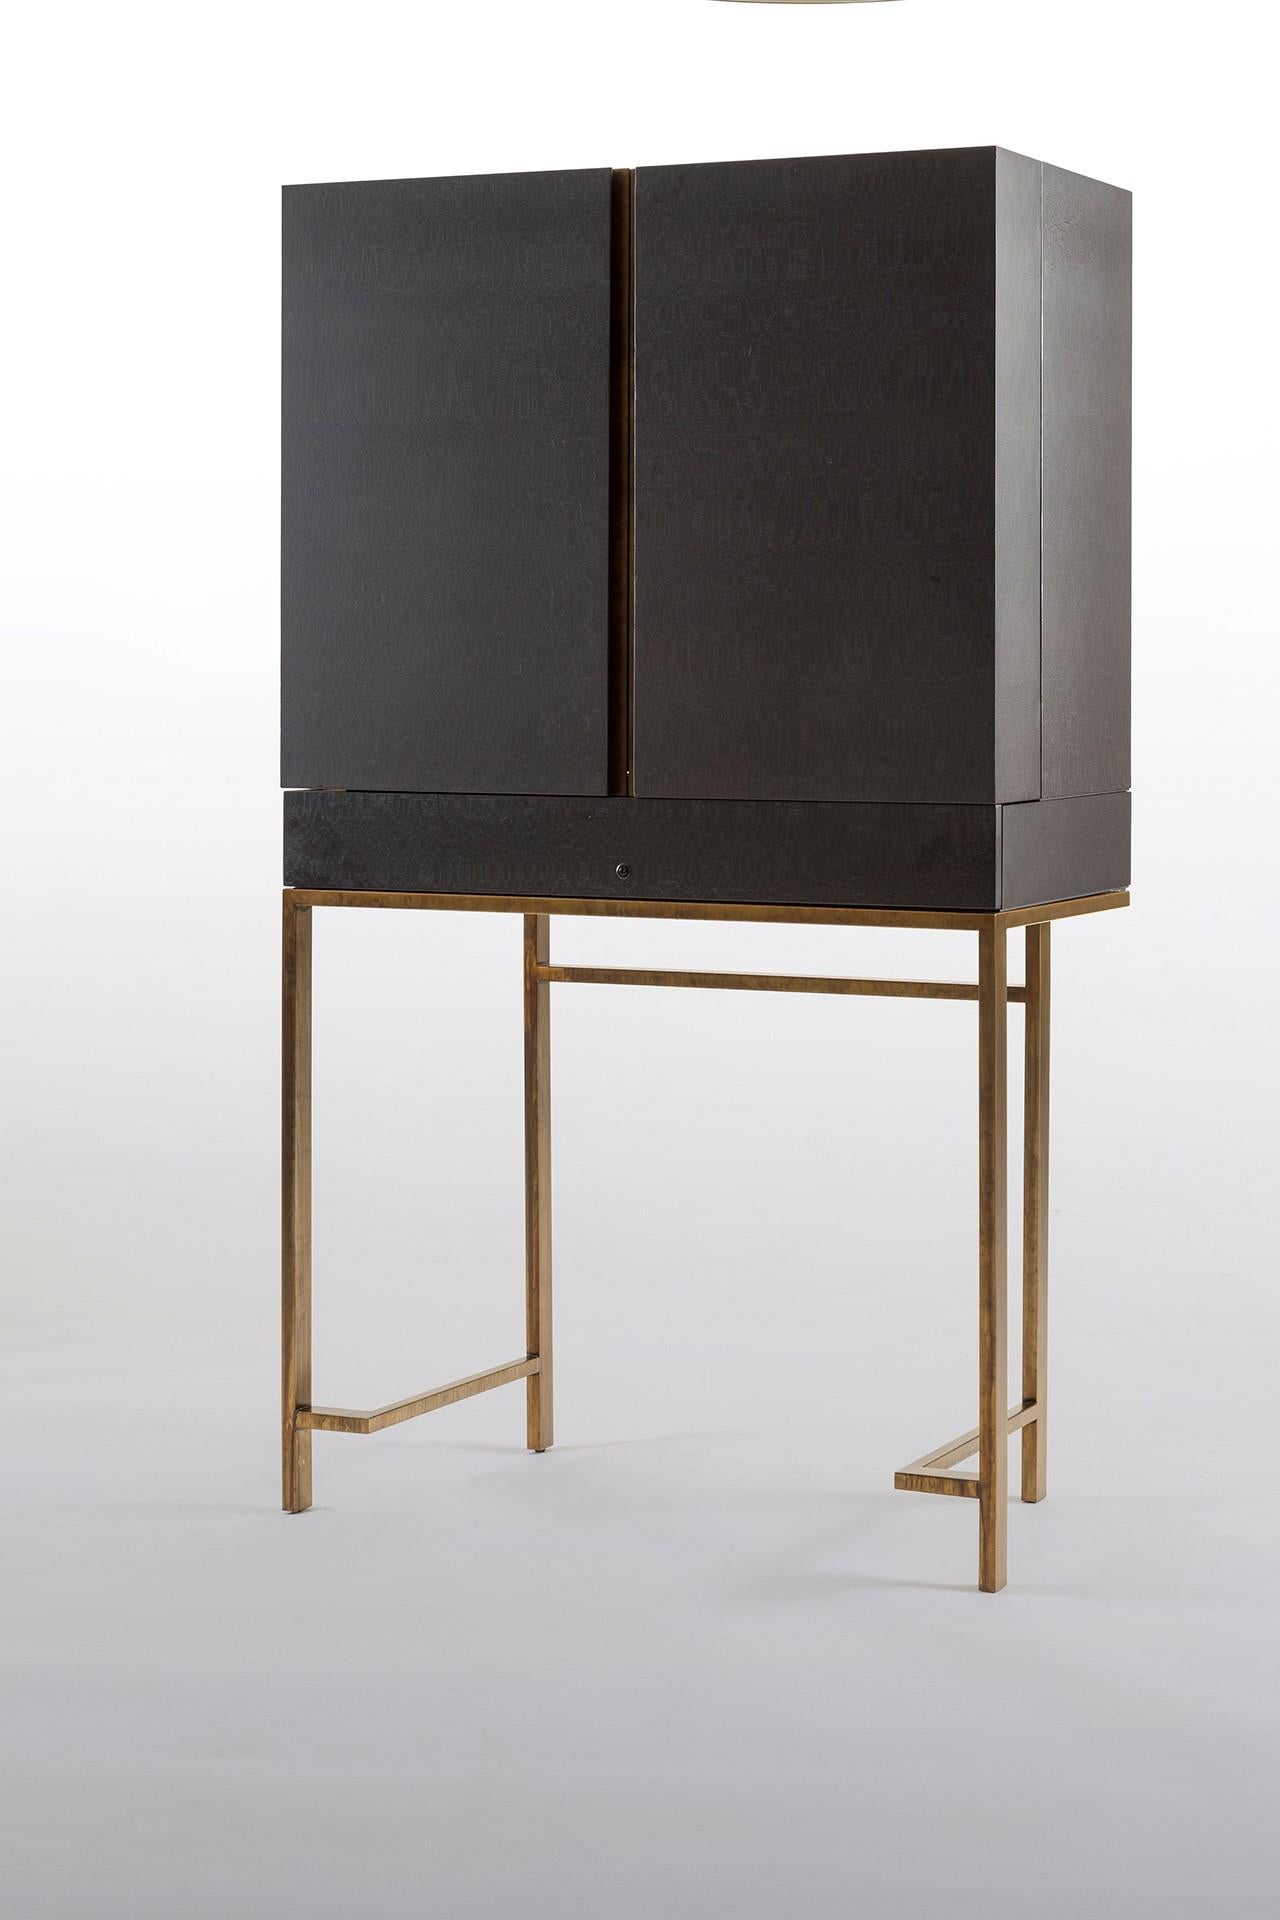 Surprisingly functional, its simple lines and high-quality details make it a unique, elegant and timeless piece. Ready to take centre stage in any setting.
Drinks cabinet in 107 Mother of Pearl, with metal details in 082 Bronzed Steel (artisanal